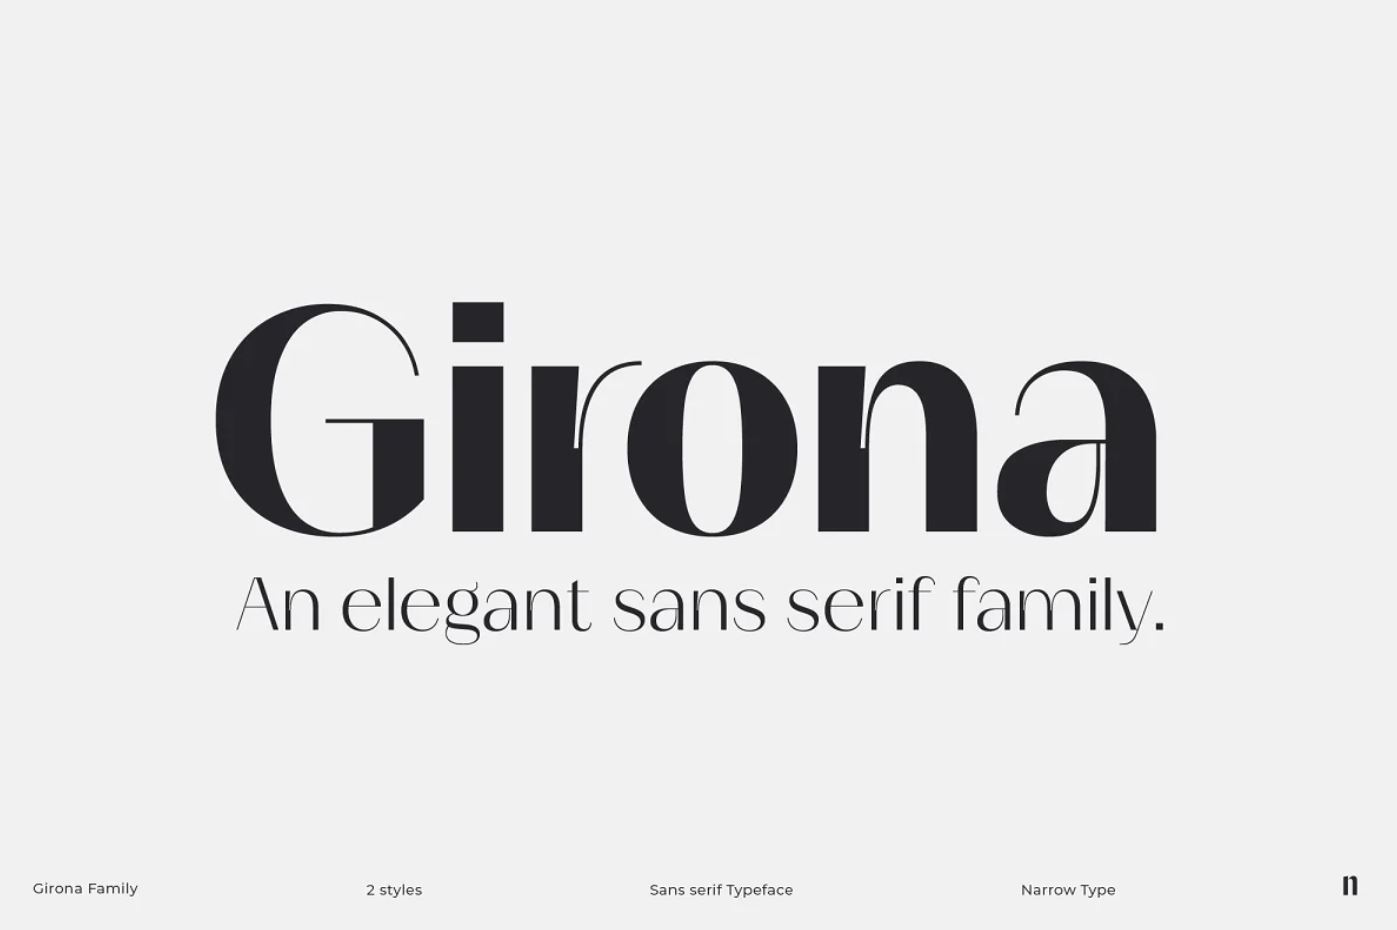 Vintage and Elegant Style Contrast Typeface